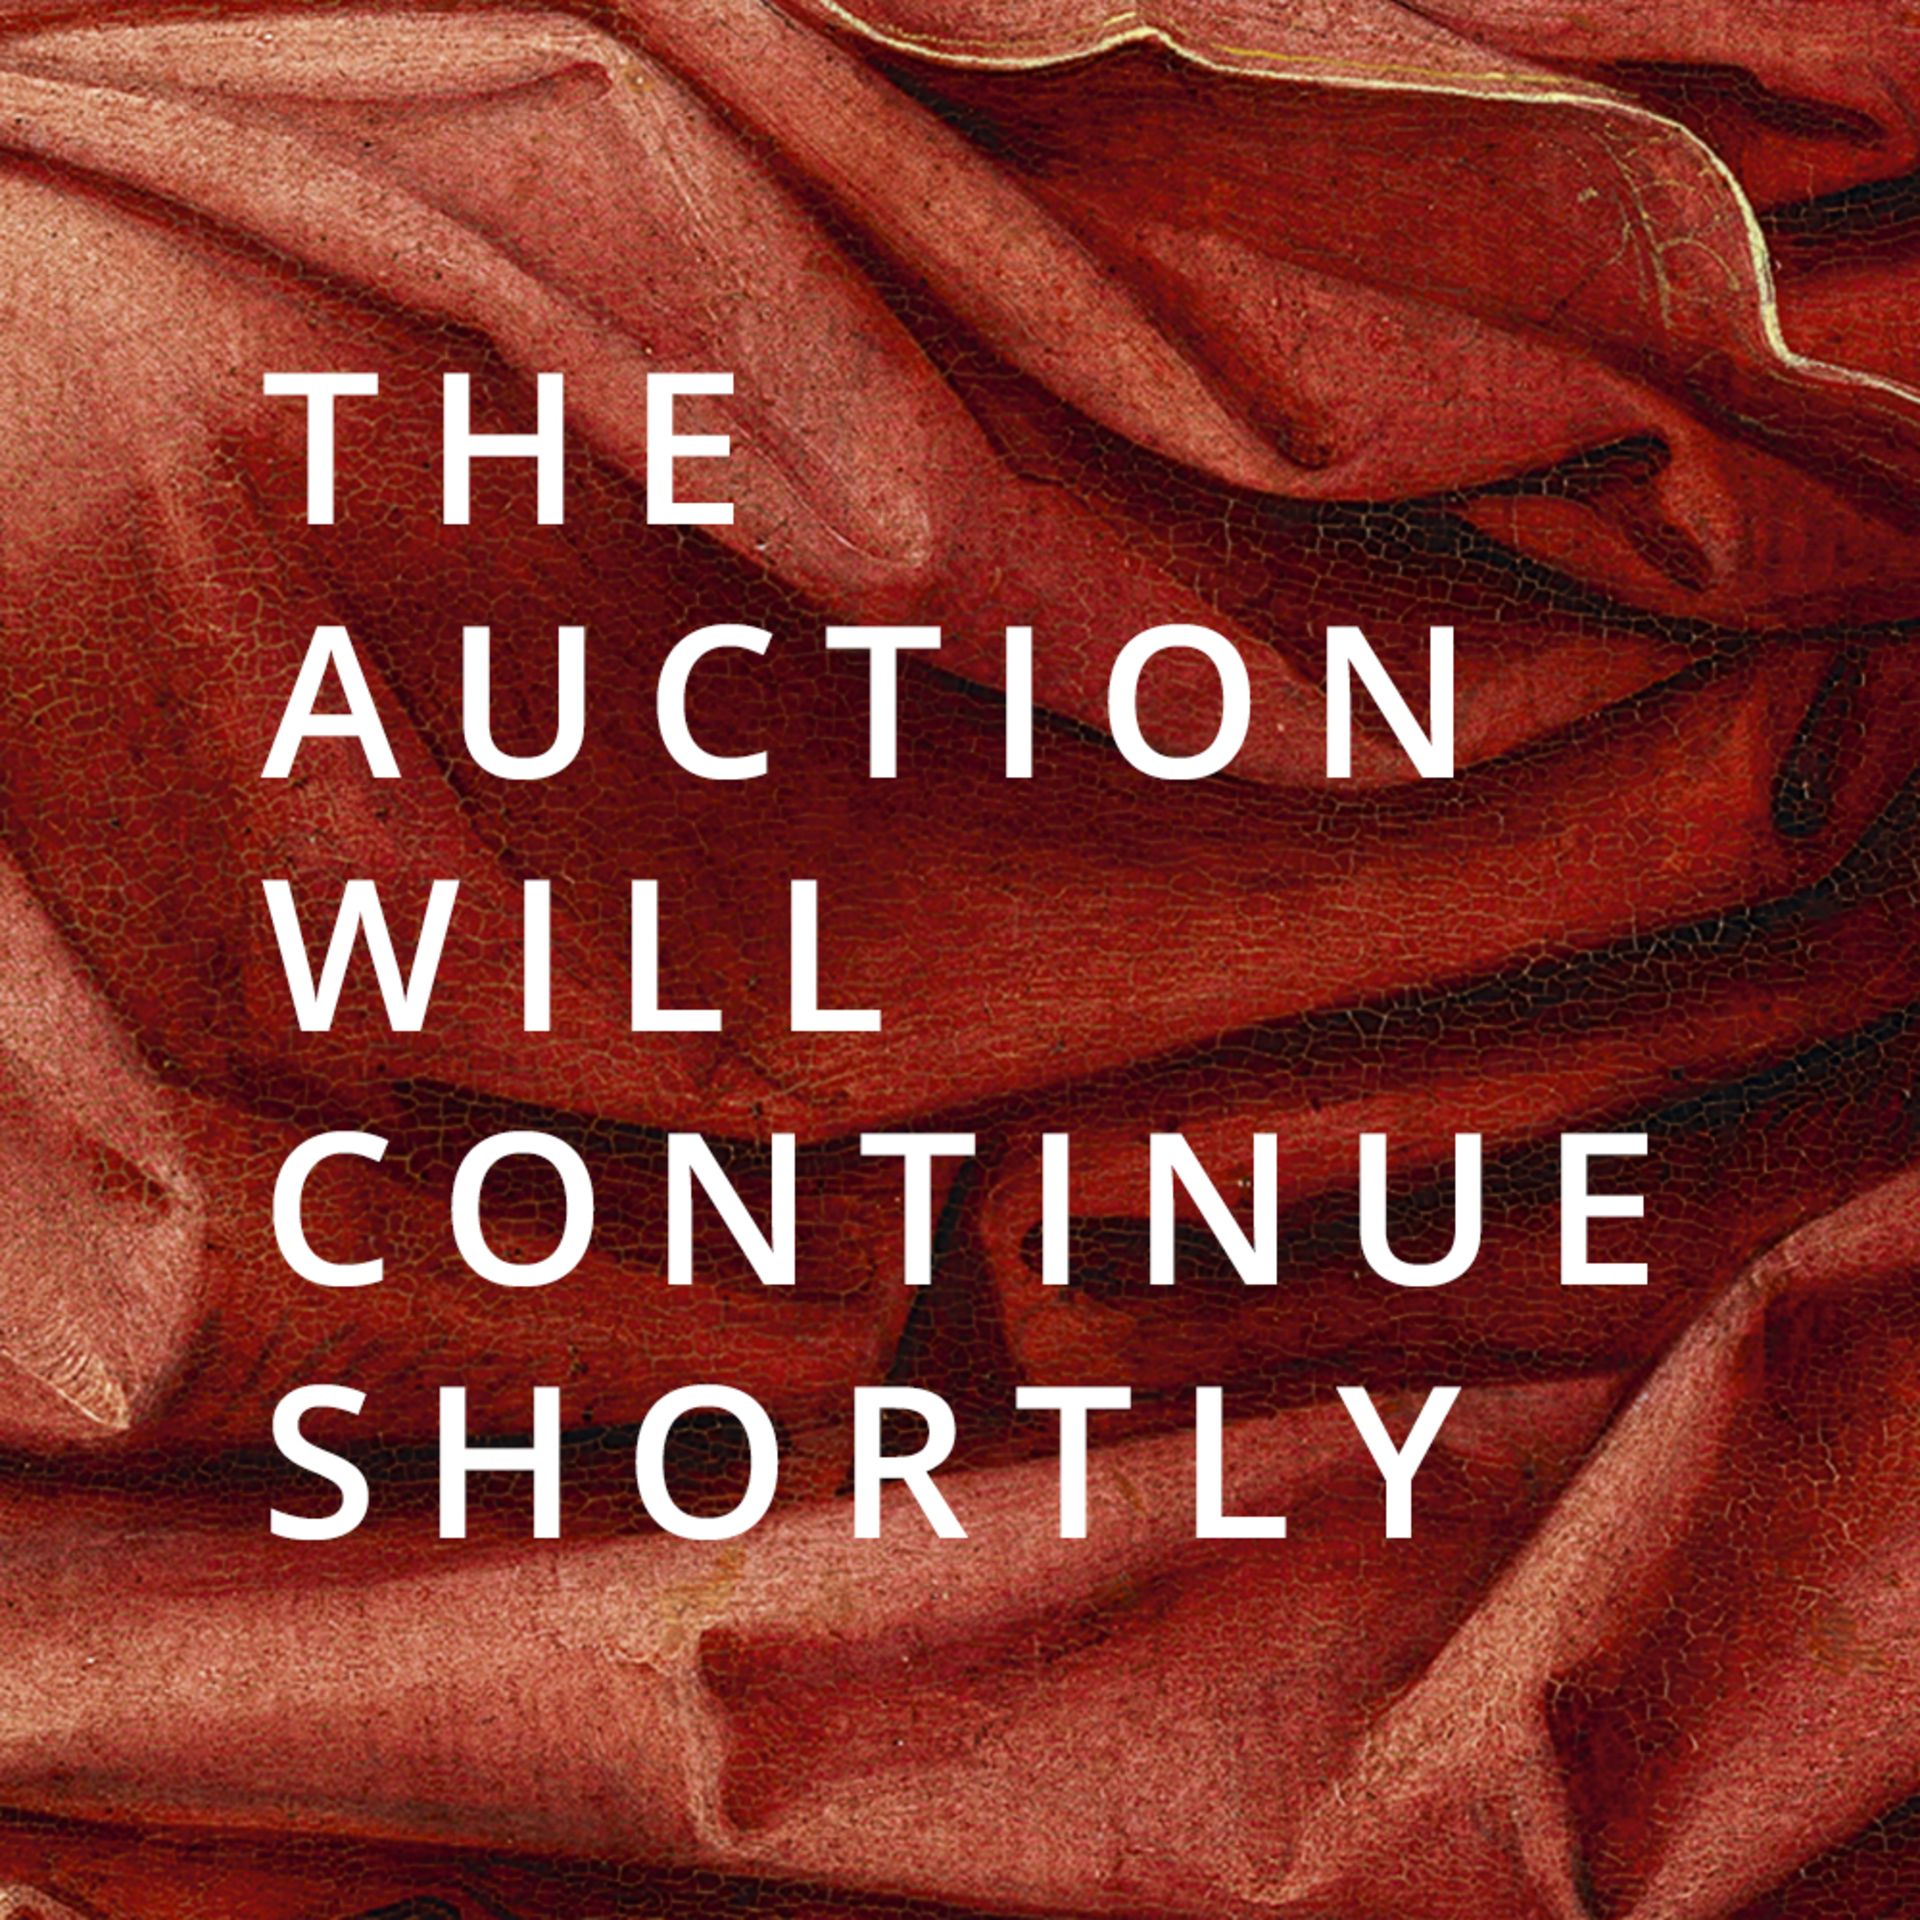 The auction will continue at 2 pm